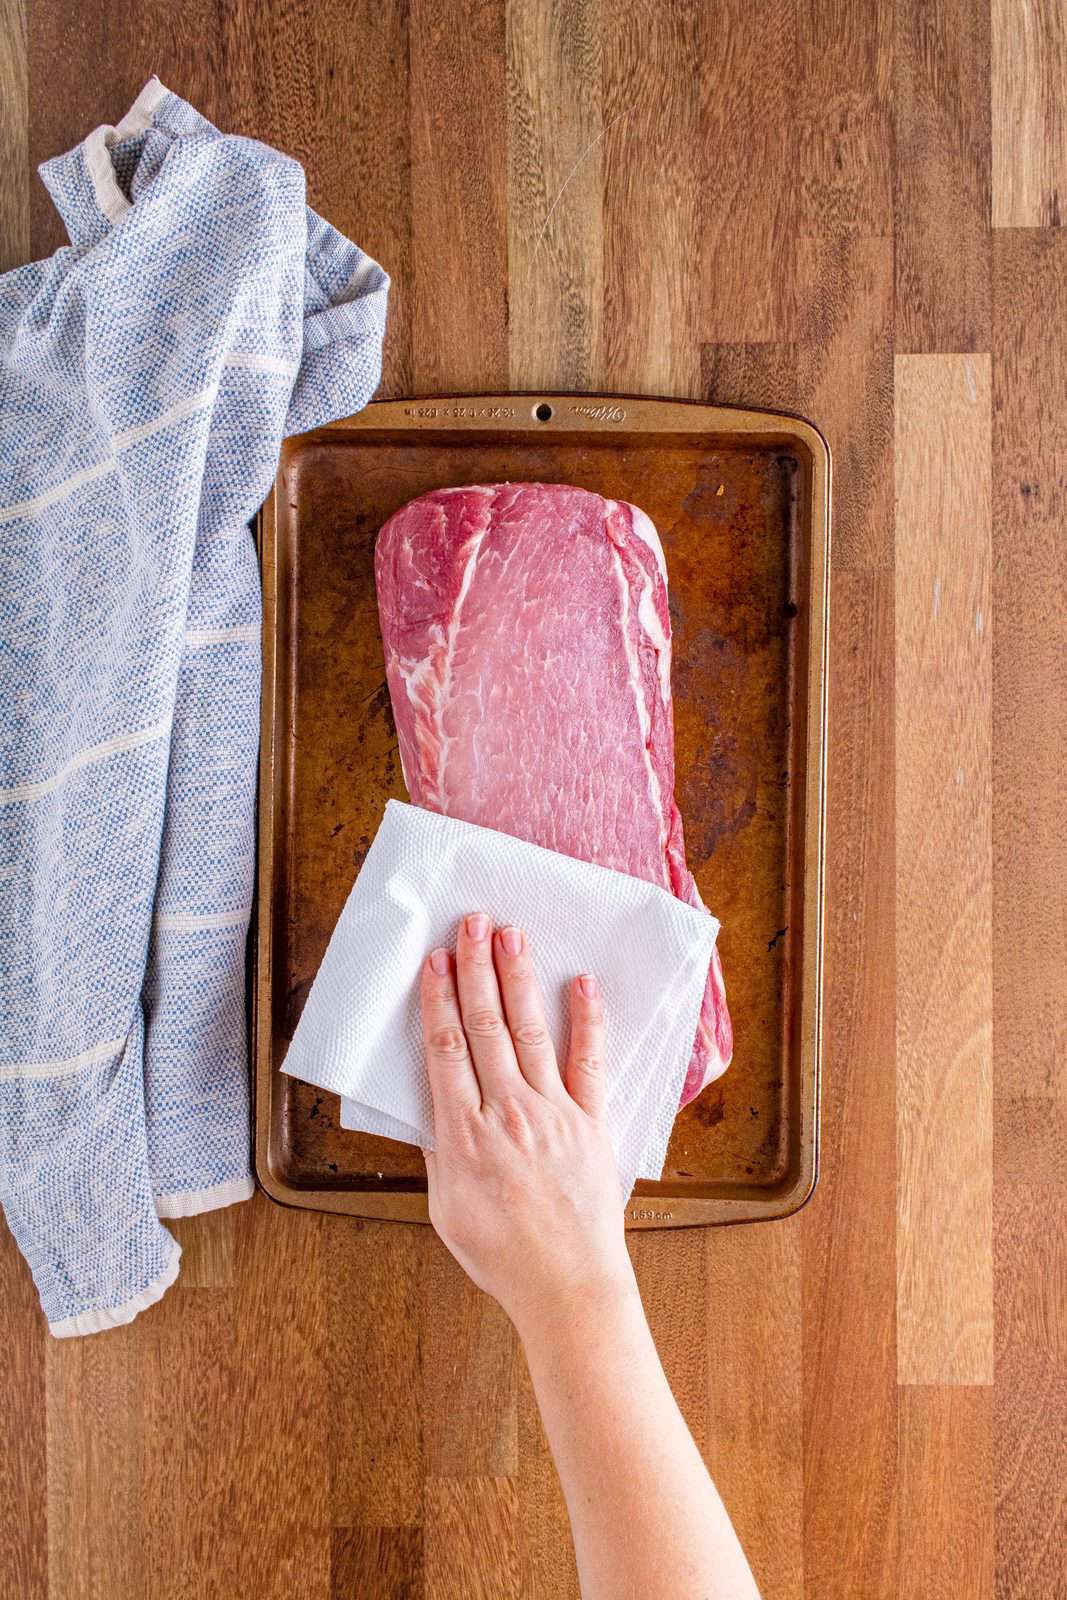 a hand holding a paper towel and patting dry a pork roast.